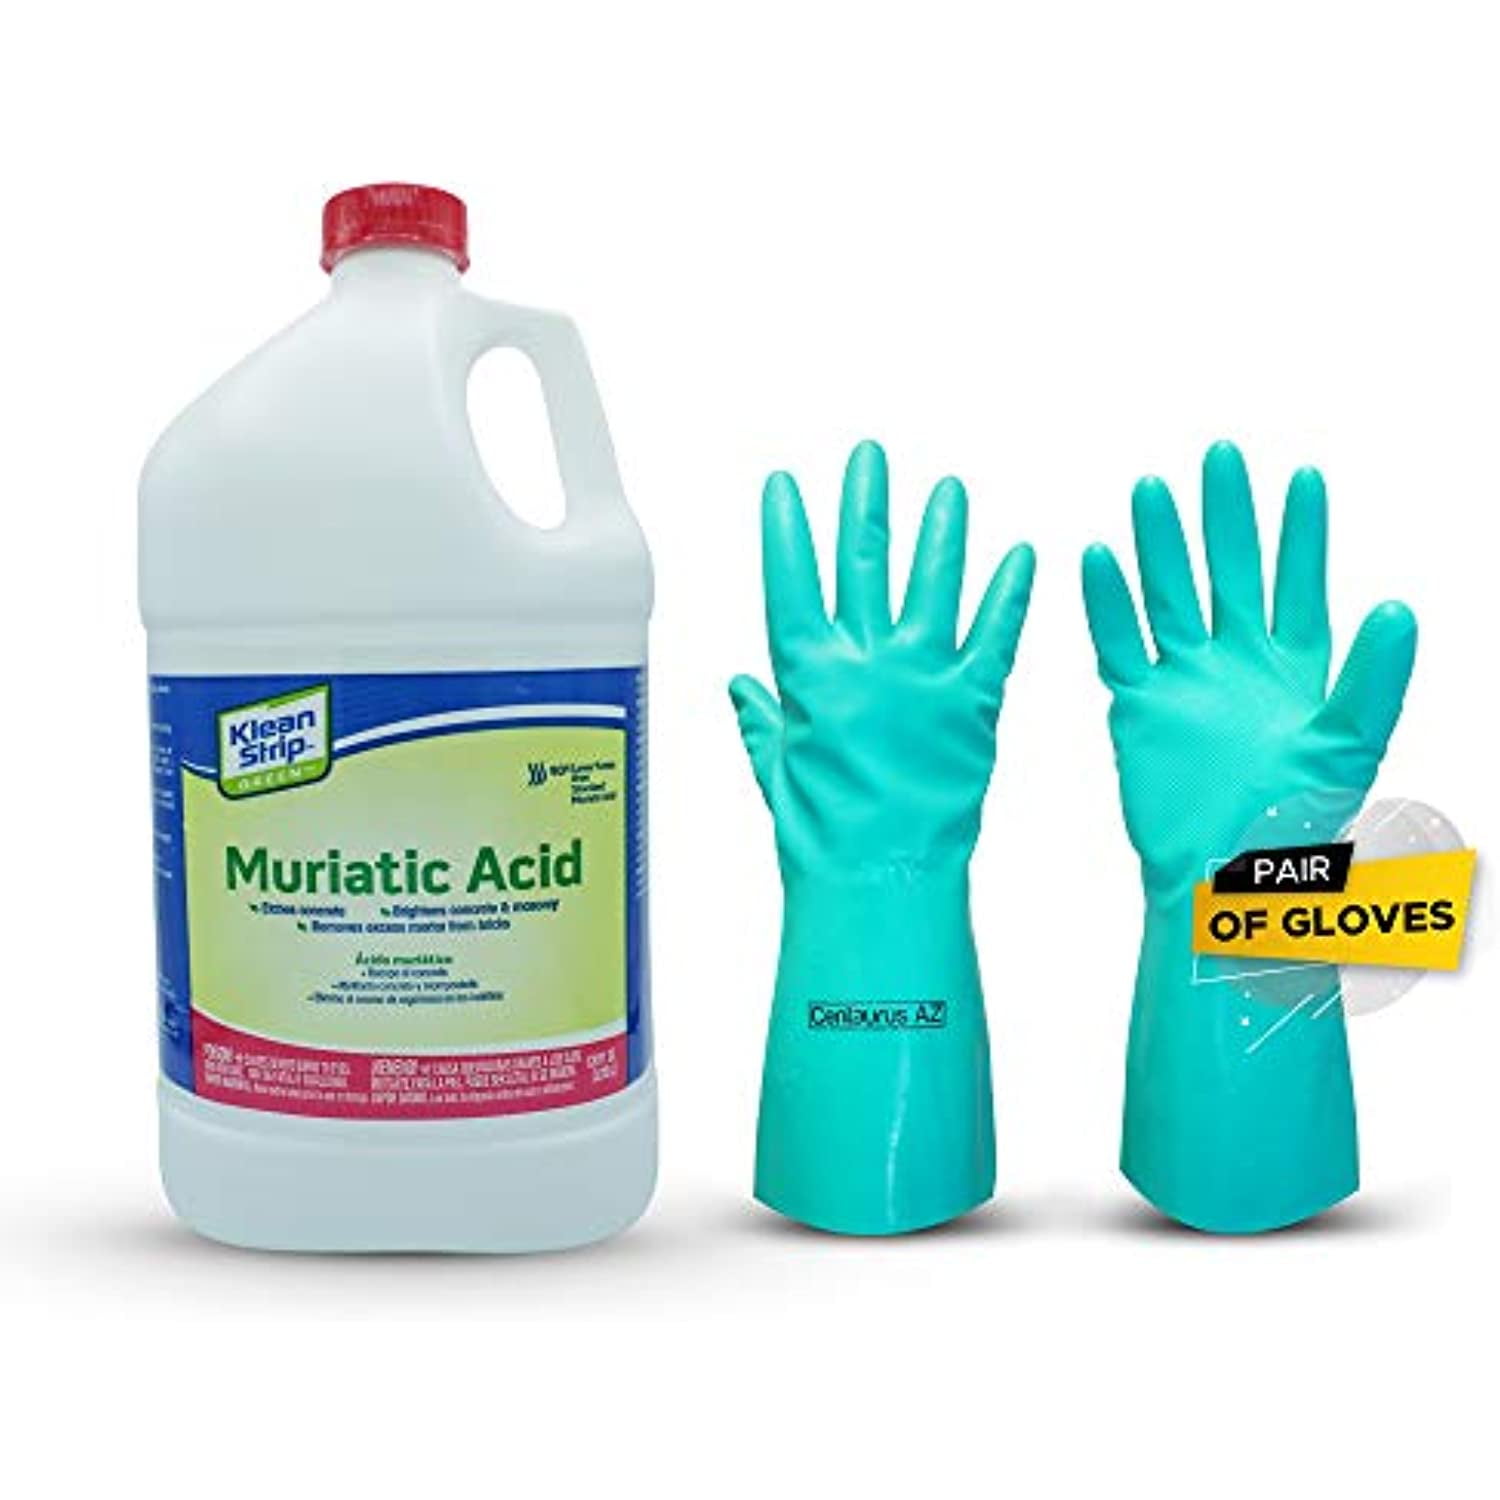 Kleenwise Cleaner and Descaler